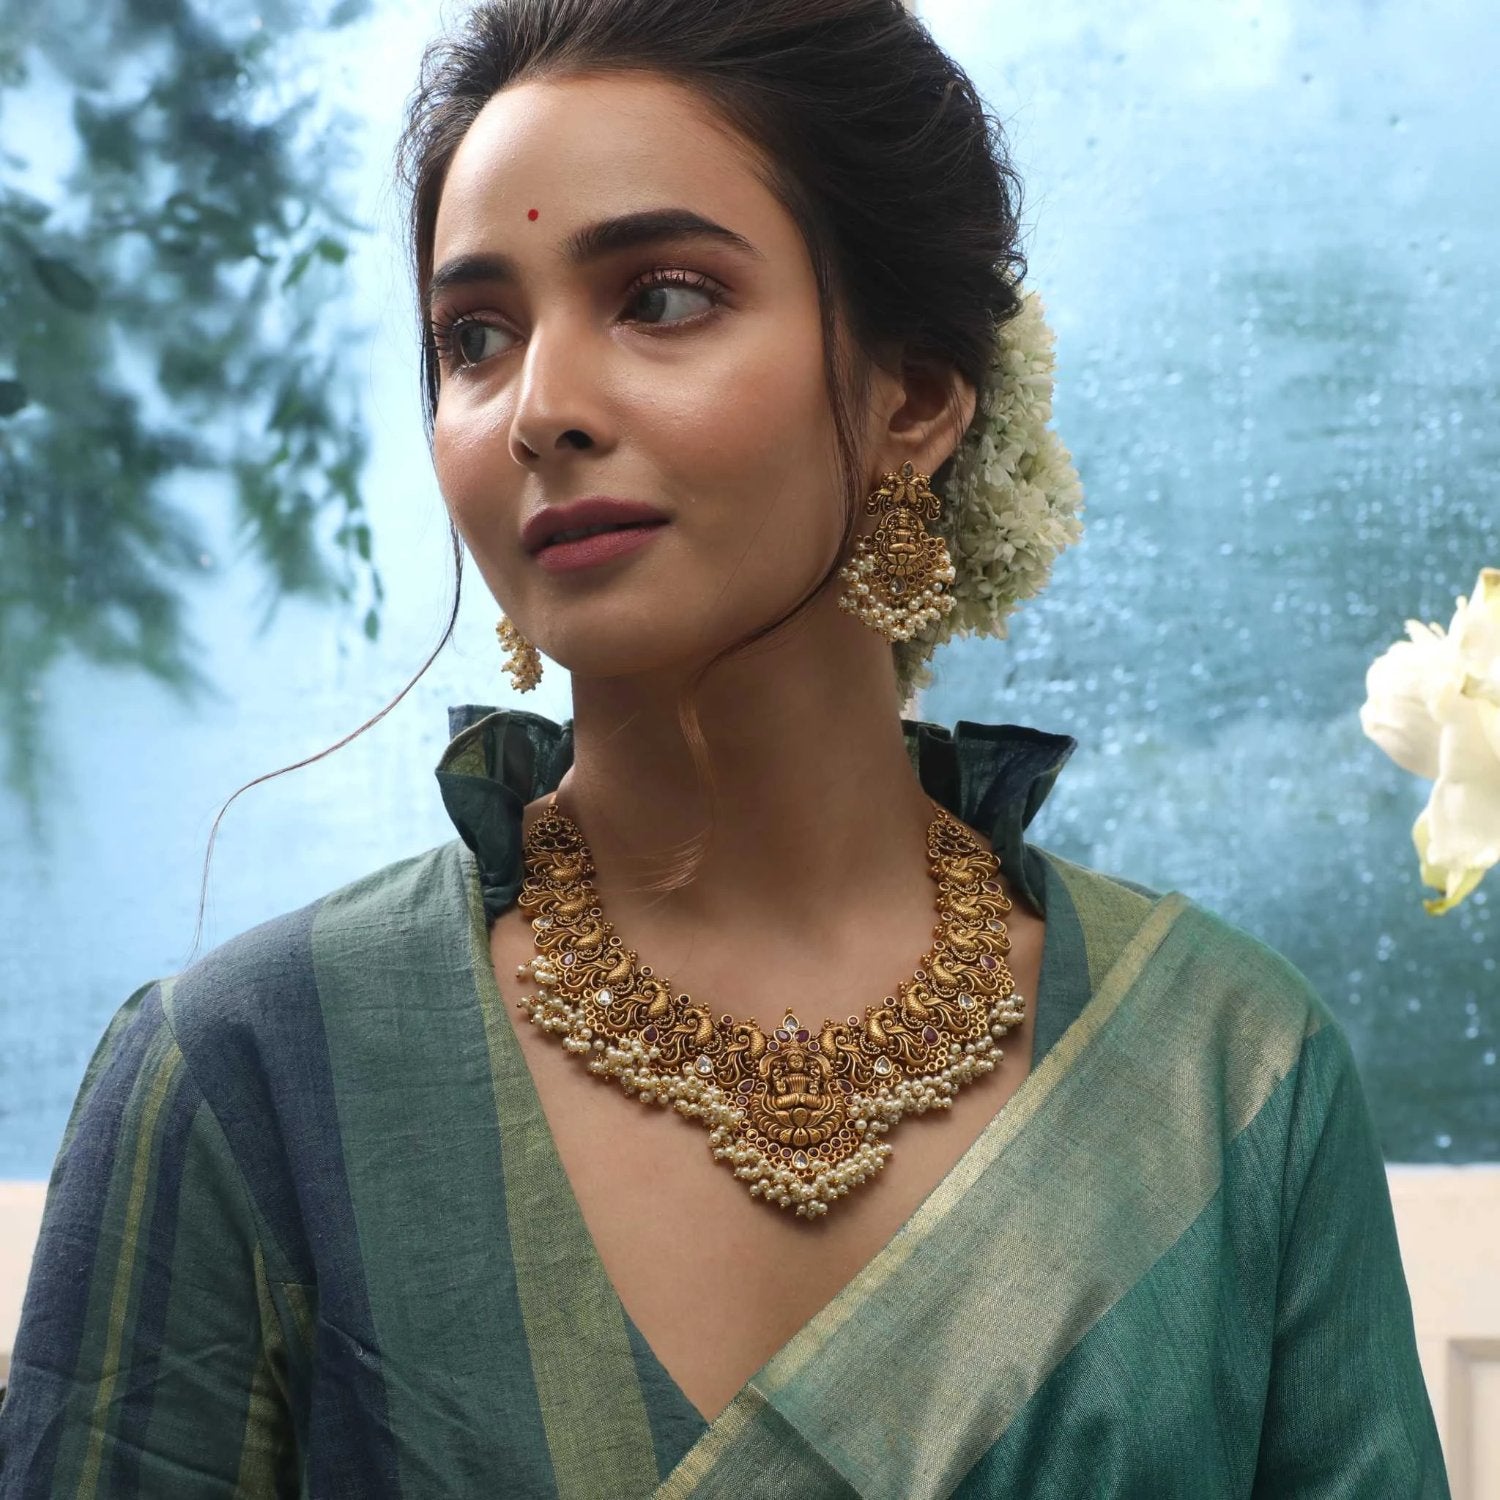 A picture of an Indian artificial gold necklace and earring set. The necklace is embellished with pearls and the earrings are chandelier style.